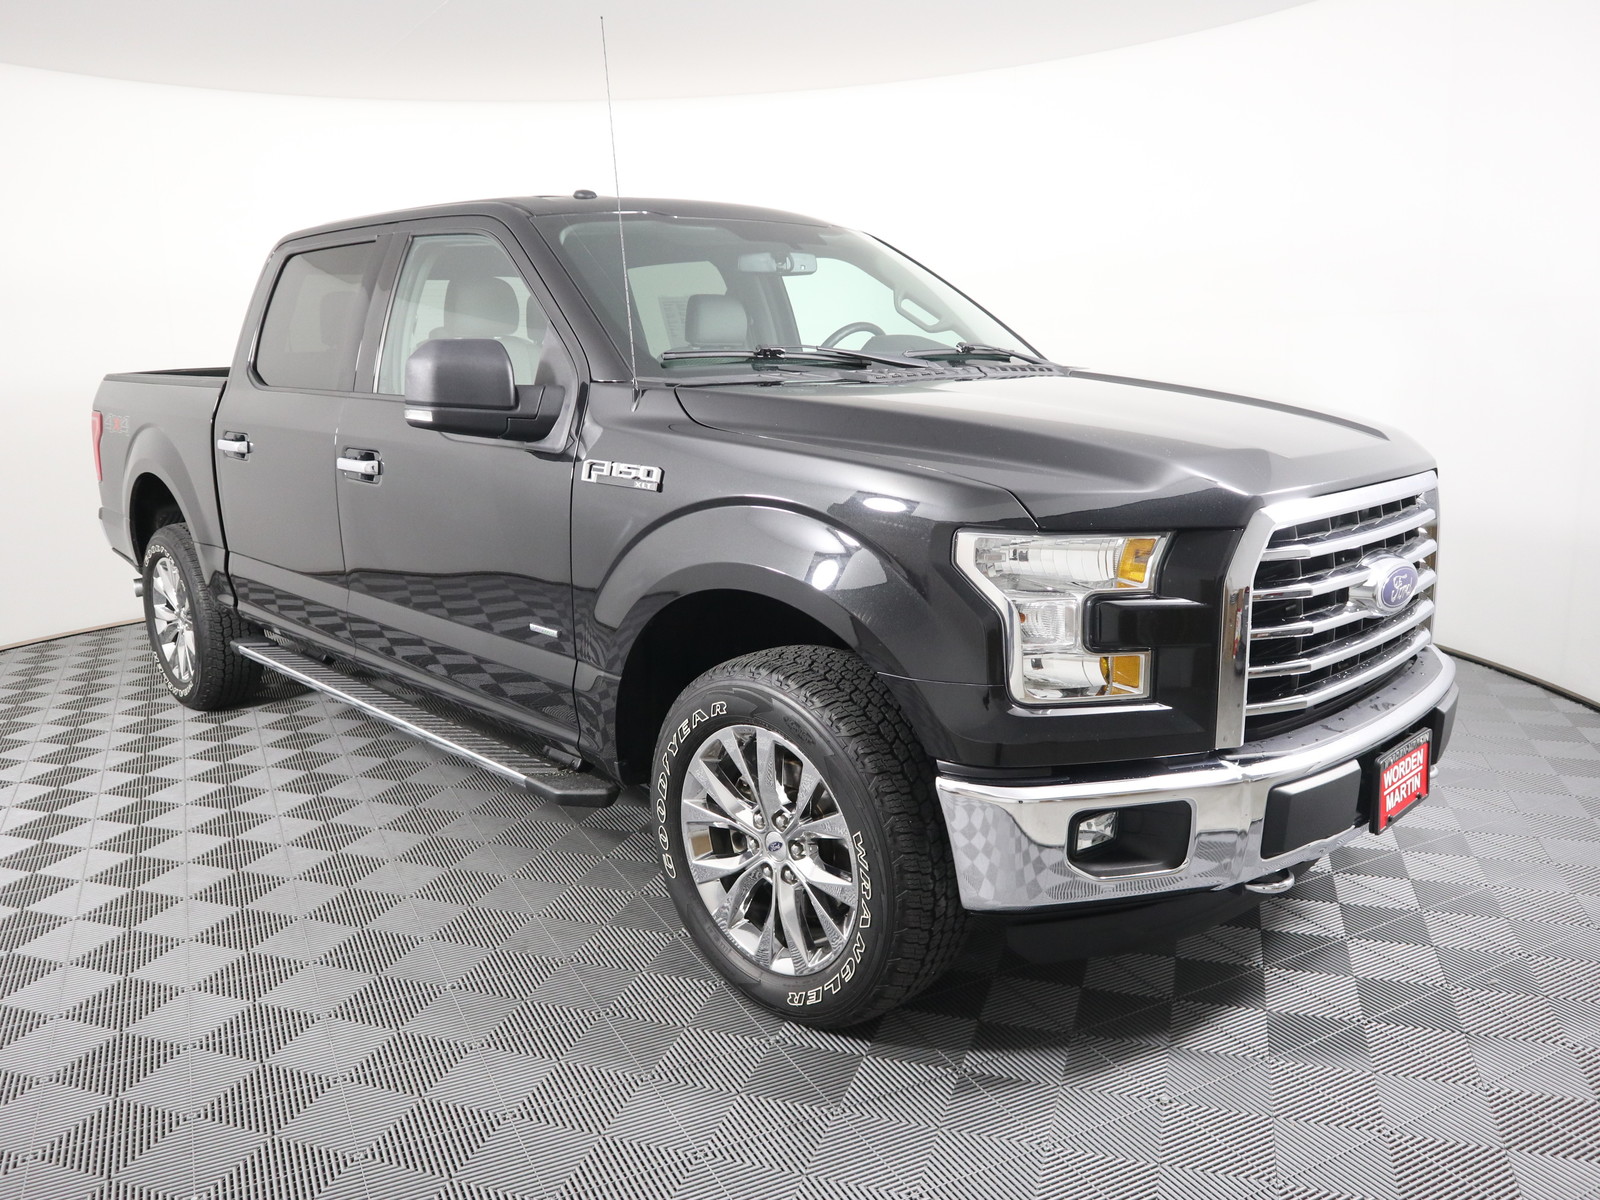 Pre-Owned 2015 Ford F-150 4WD SuperCrew 145 XLT Crew Cab Pickup in